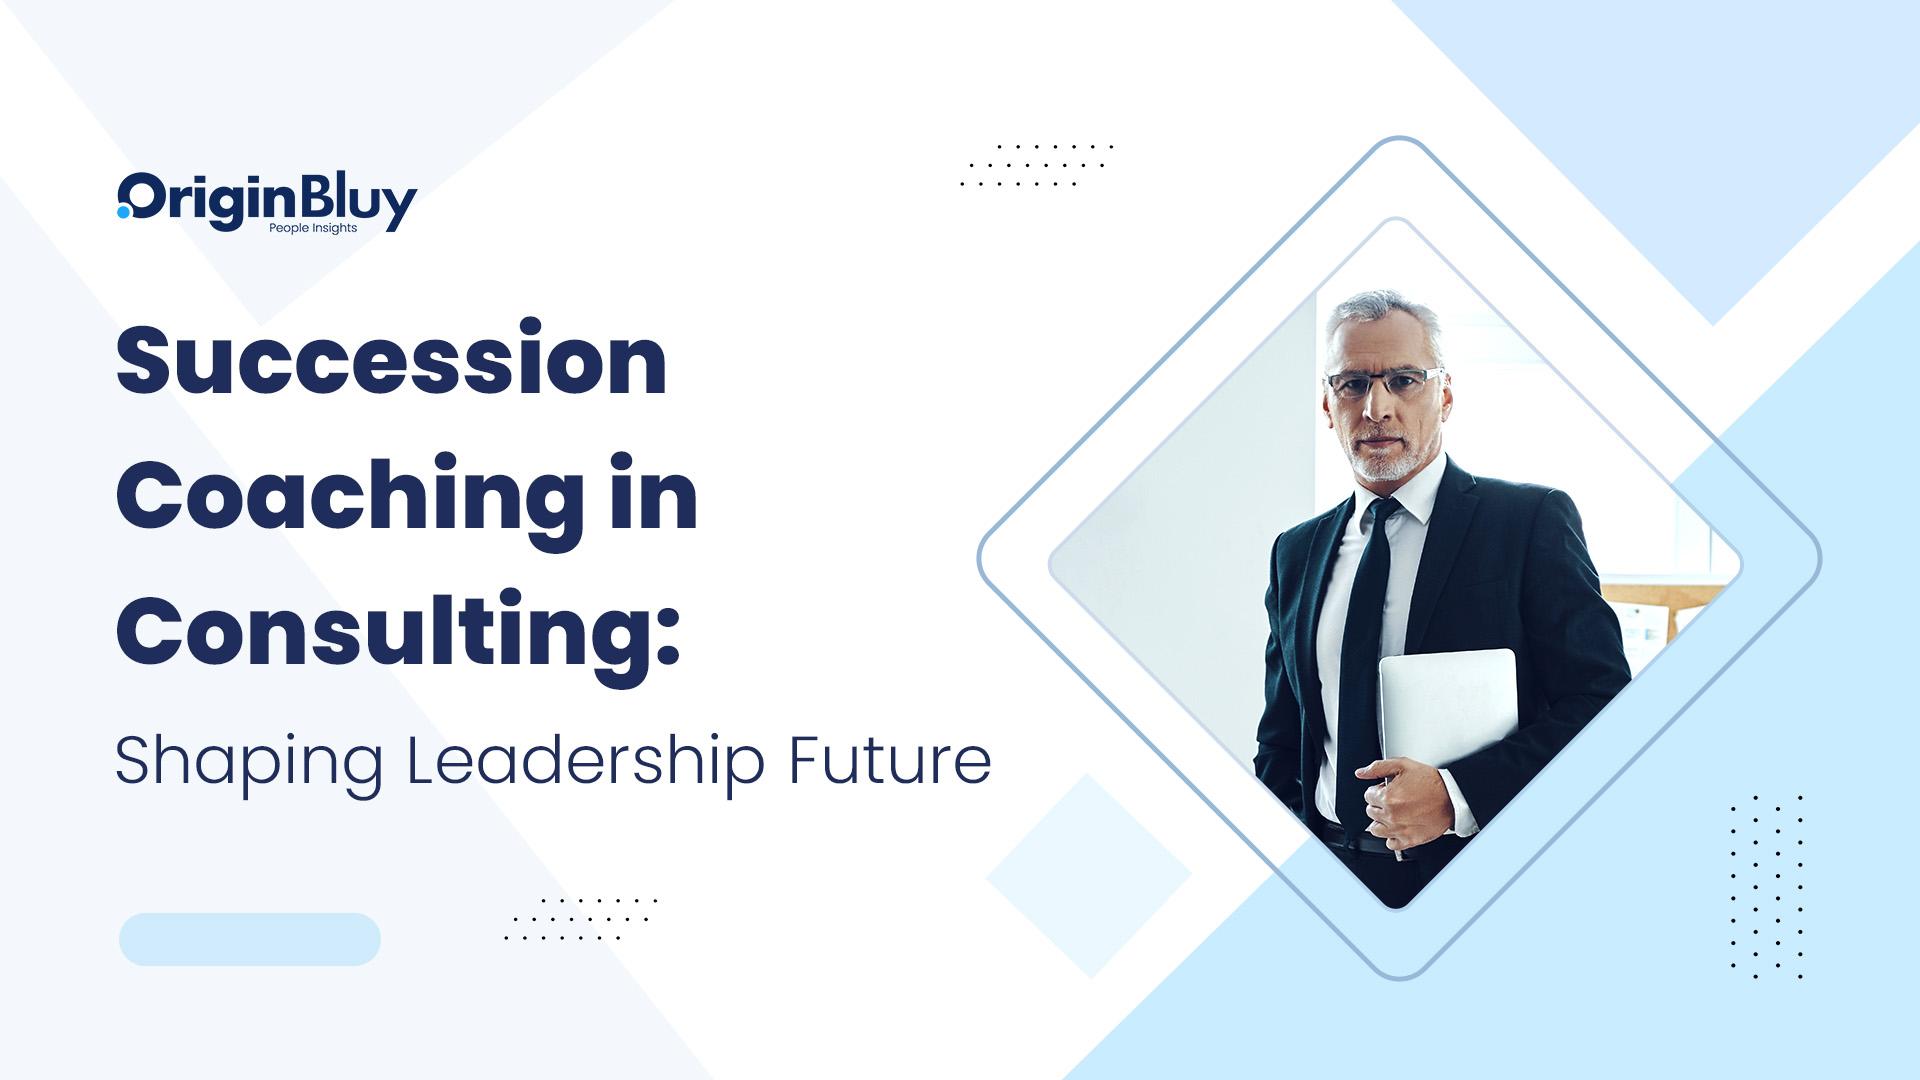 Succession Coaching in Consulting